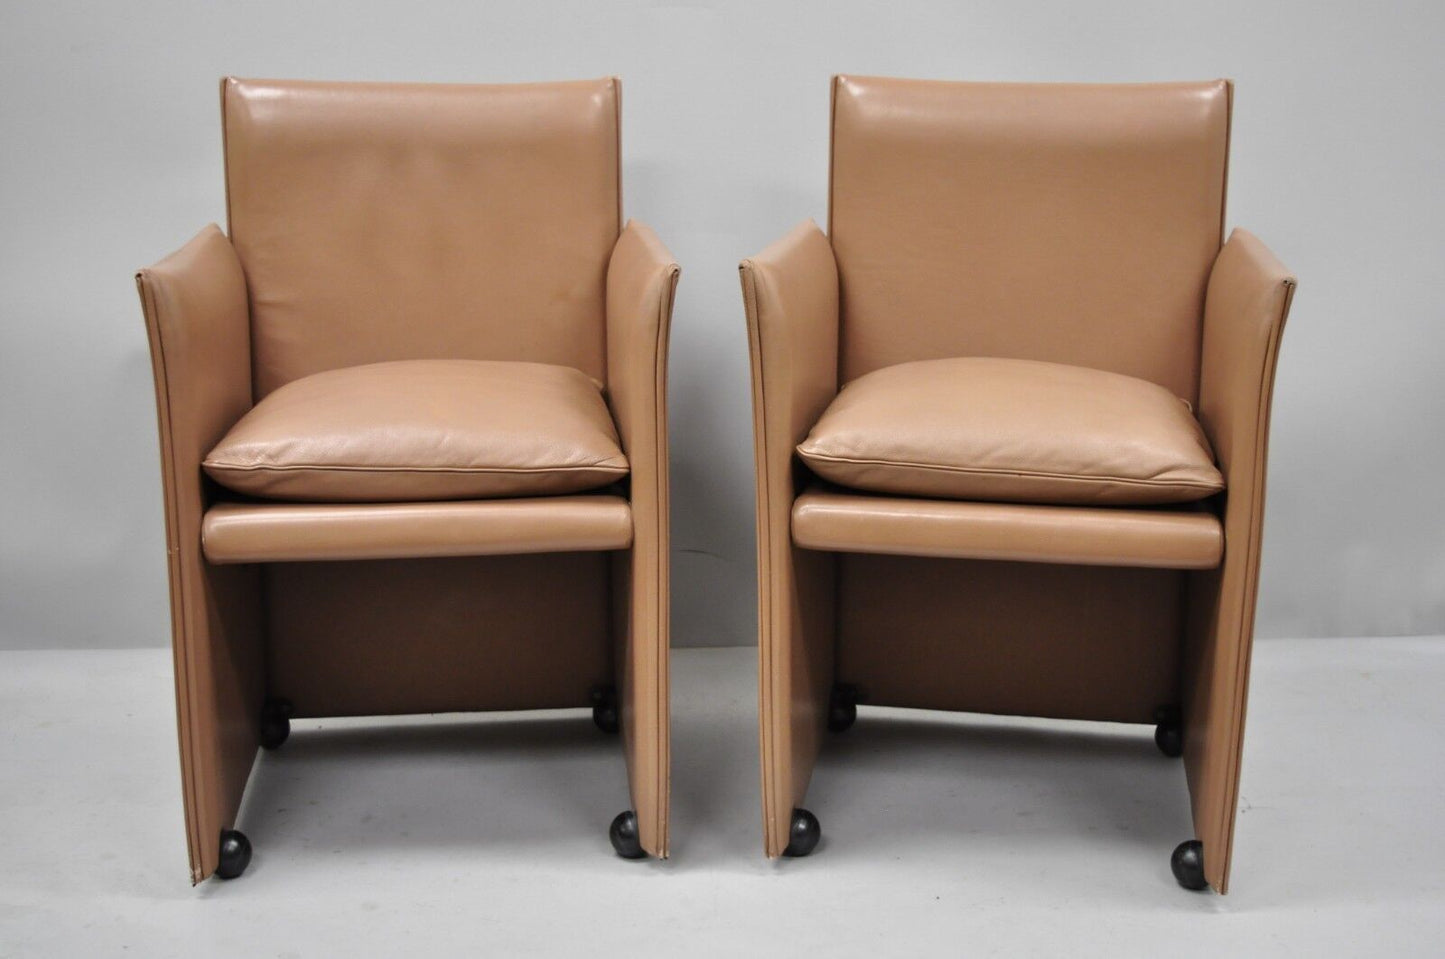 401 Break Armchair by Mario Bellini for Cassina Copper Leather 6 Dining Chairs